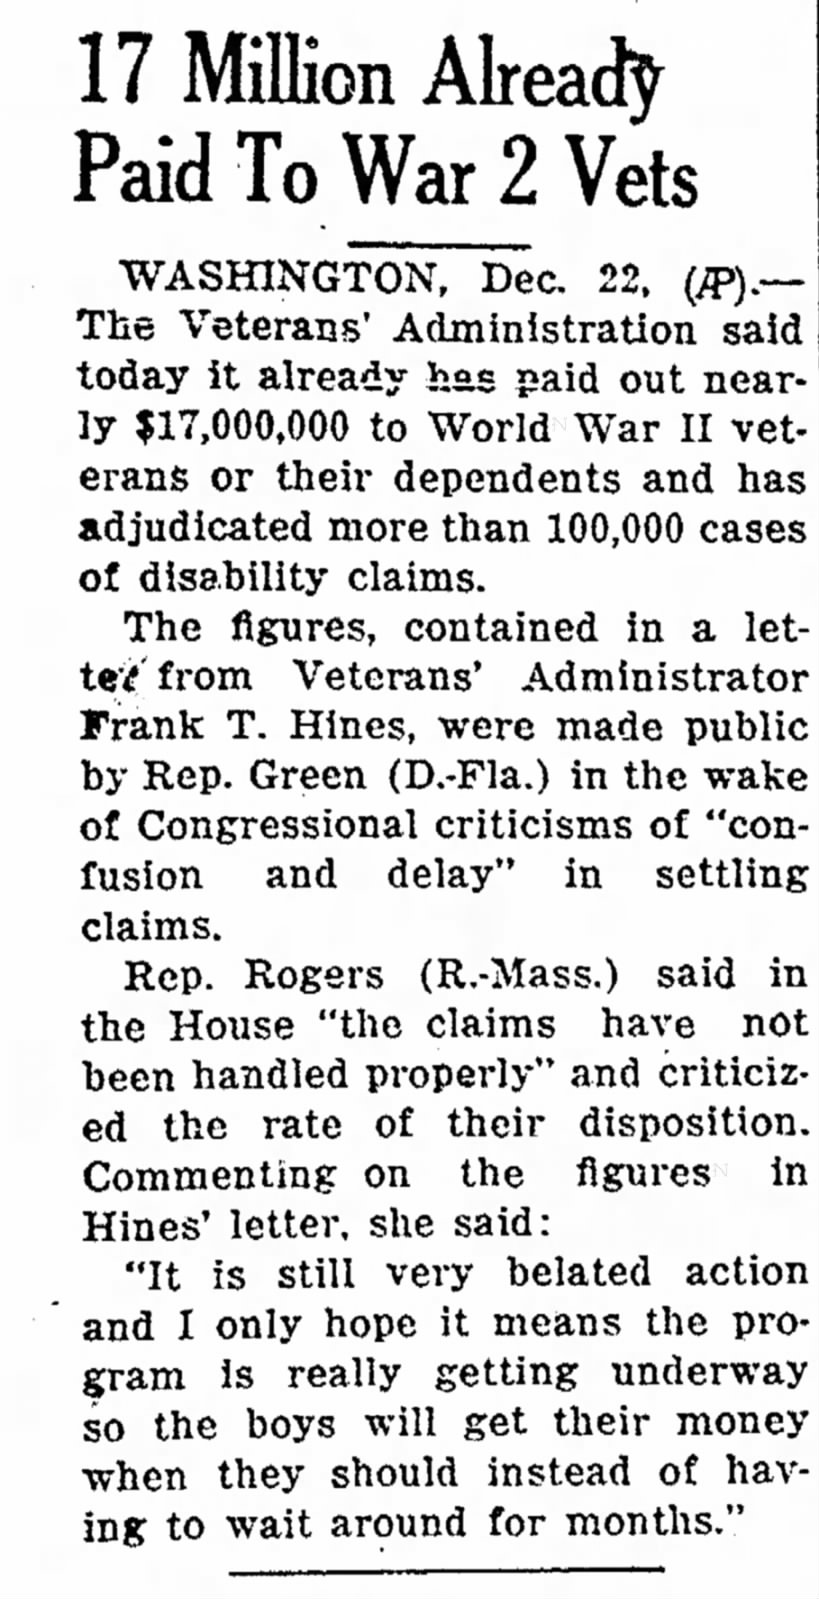 17 Million Already Paid to War 2 Vets 12/22/1943 The Daily Mail (Hagerstown, MD)